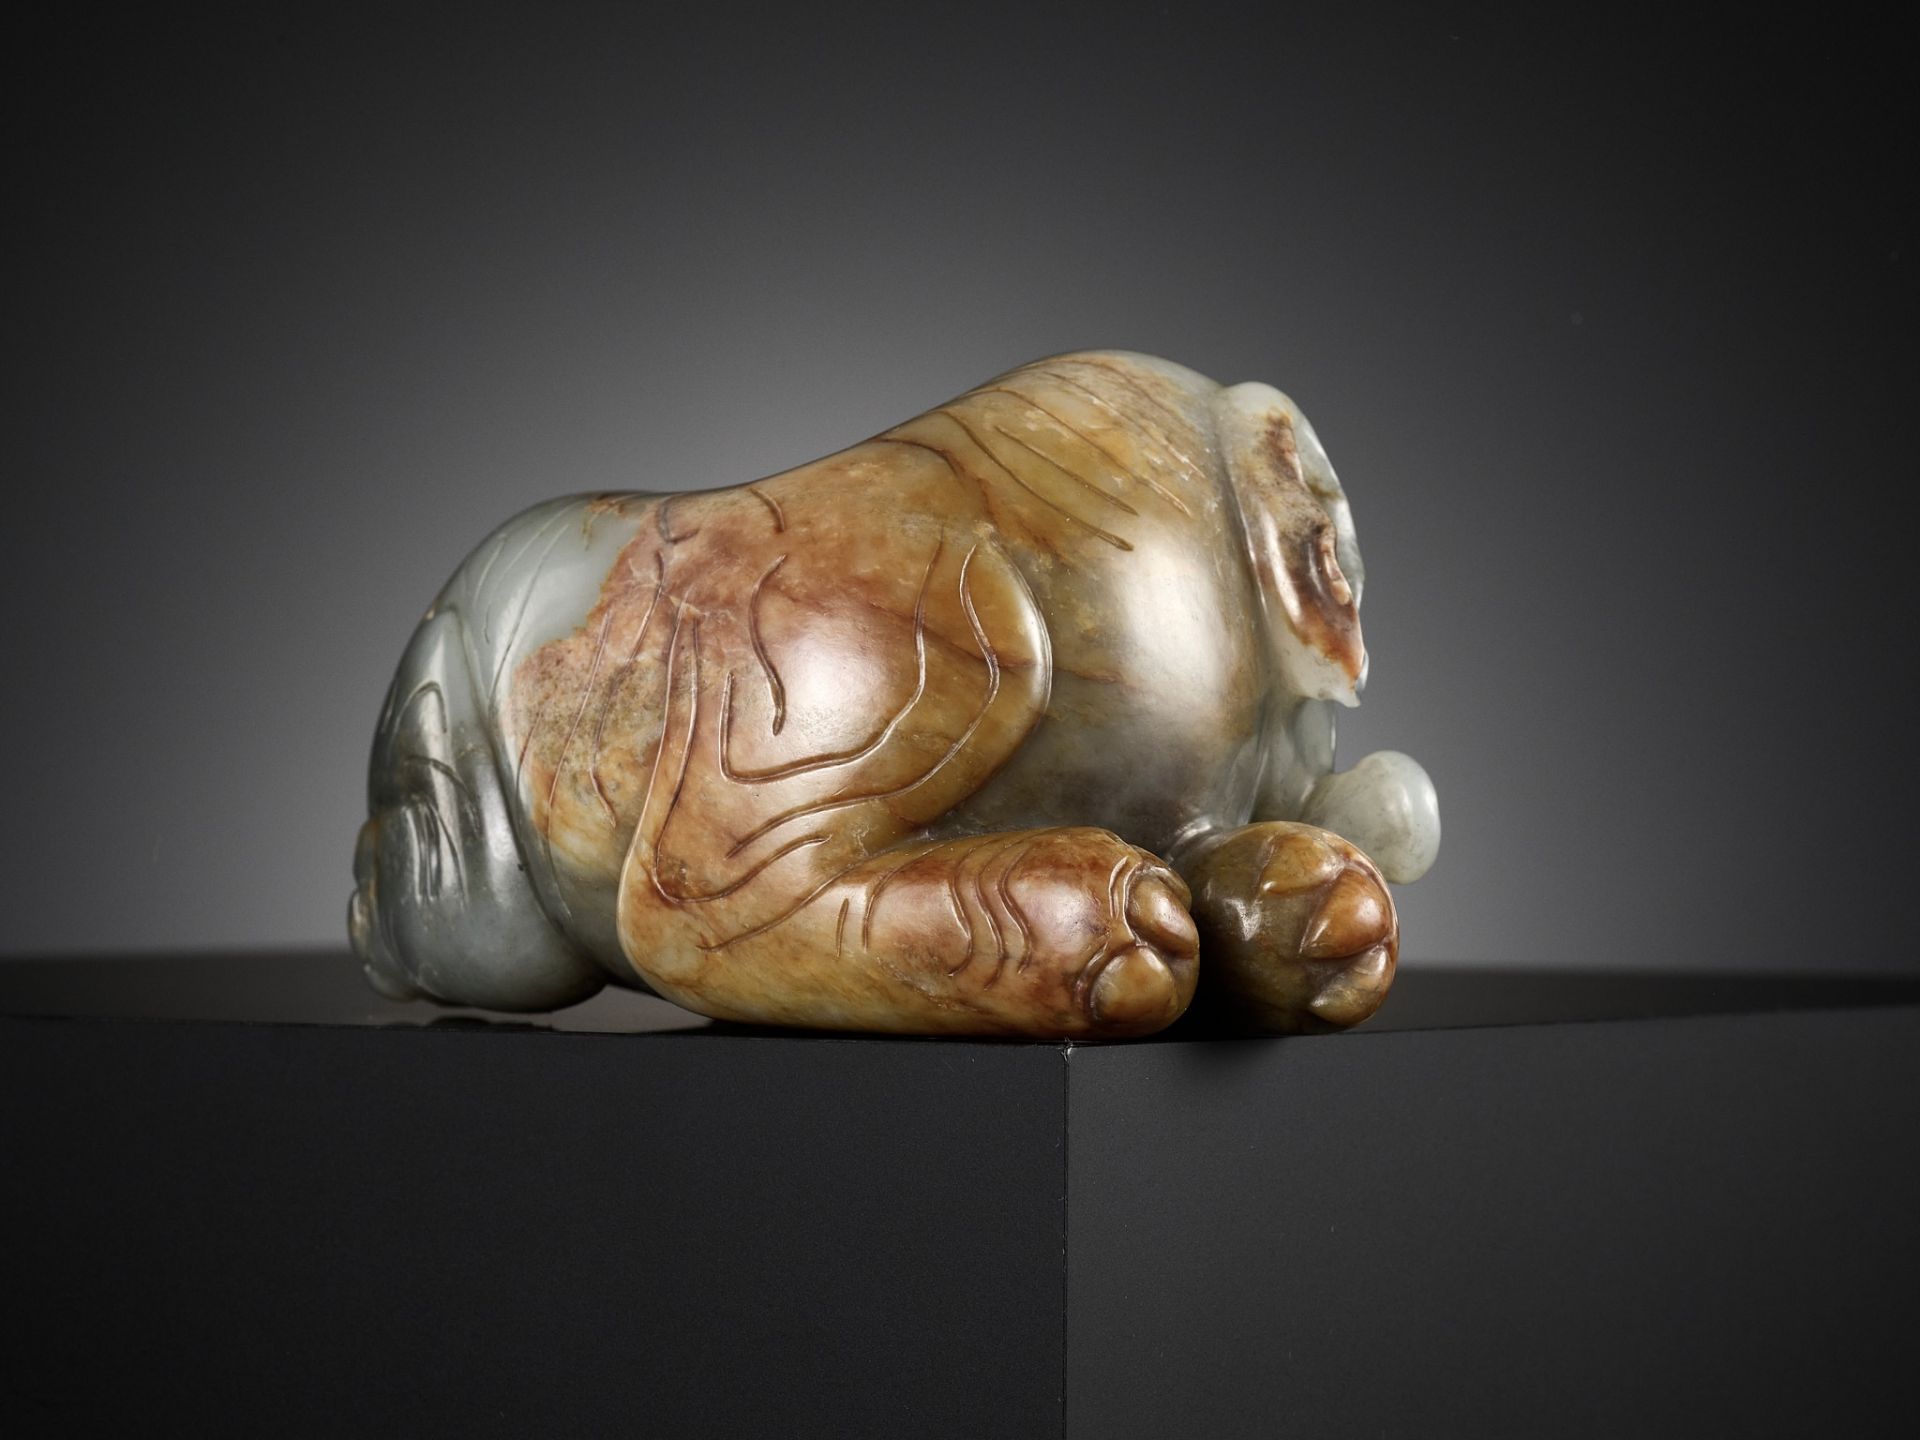 A GRAY AND RUSSET JADE FIGURE OF A RECUMBENT ELEPHANT, LATE MING TO MID-QING DYNASTY - Image 3 of 15